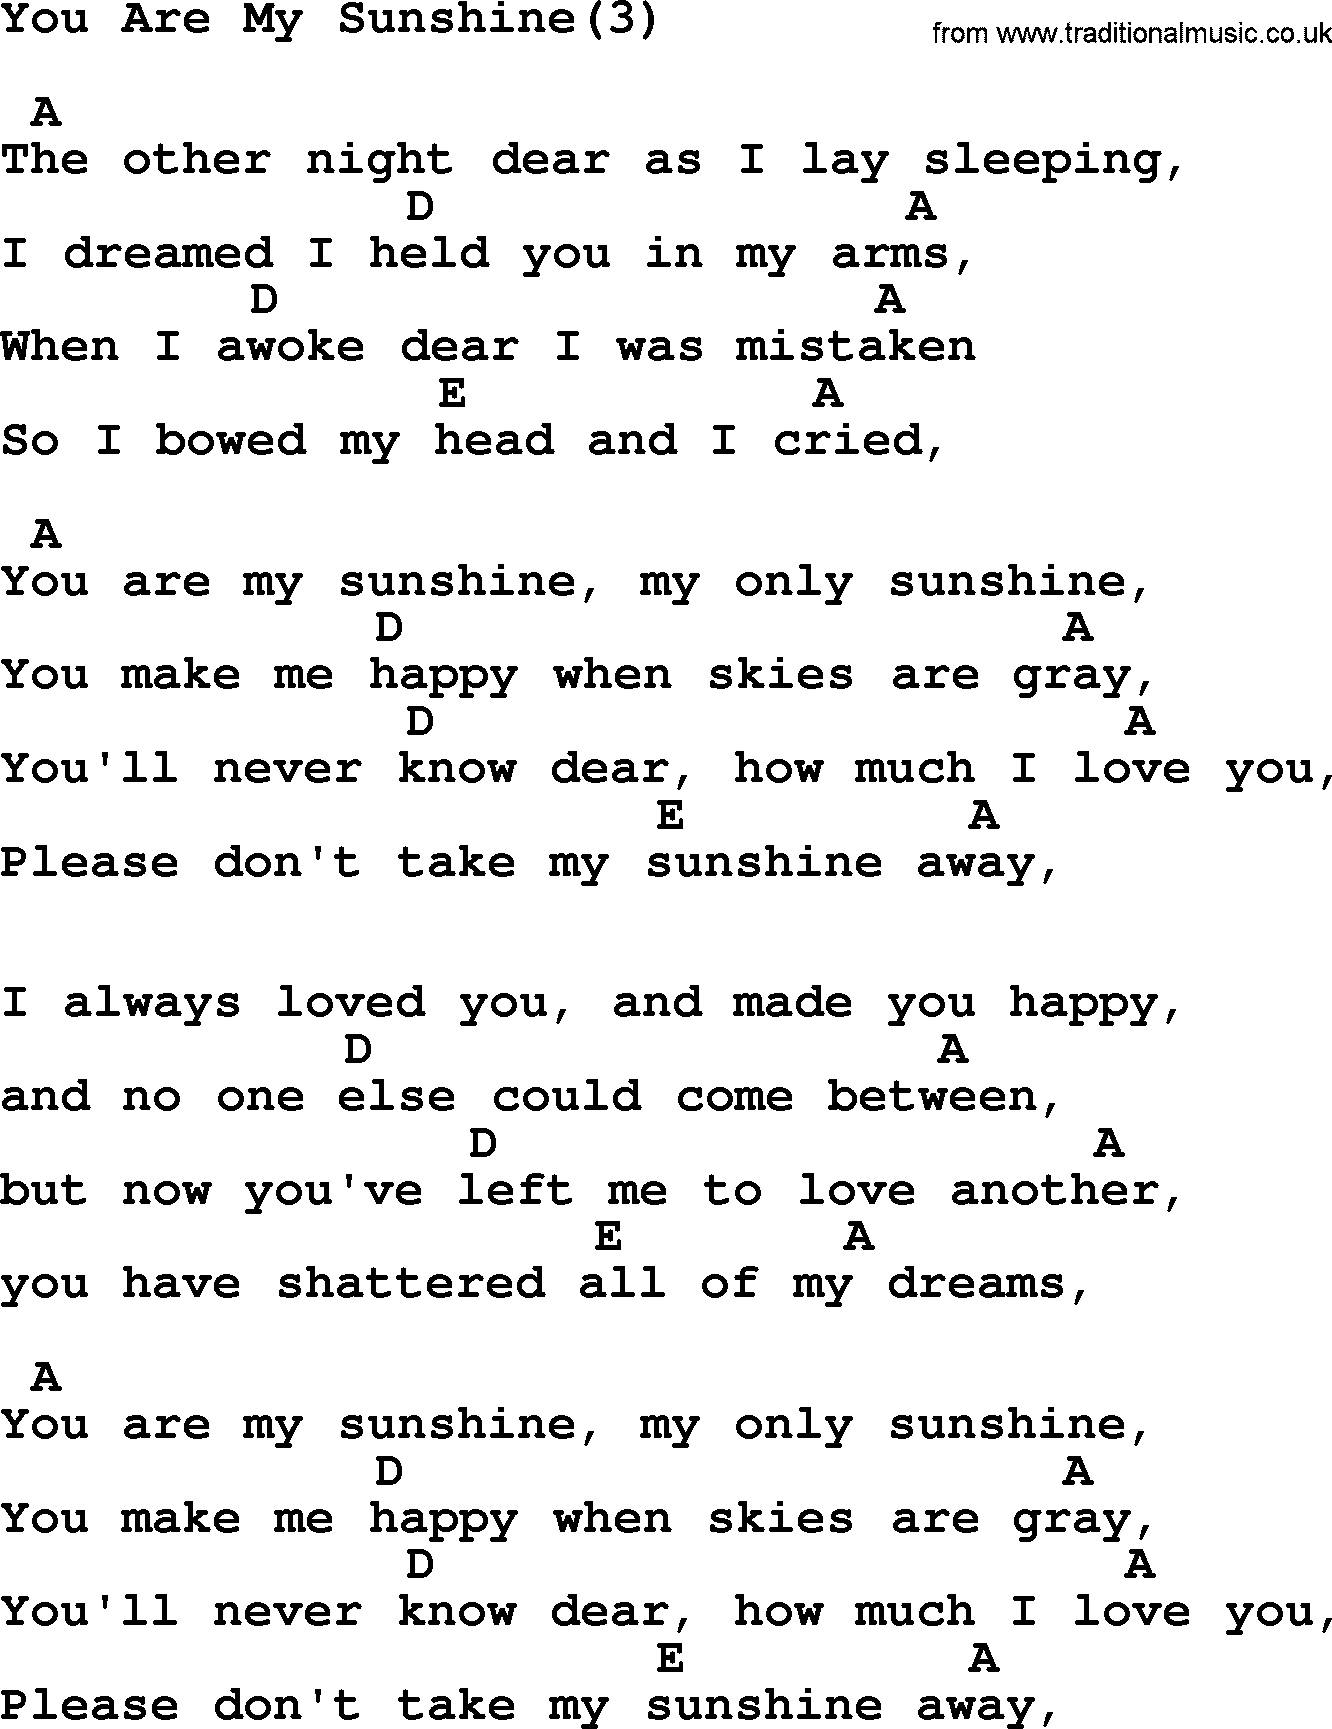 You Are My Sunshine Chords Johnny Cash Song You Are My Sunshine3 Lyrics And Chords